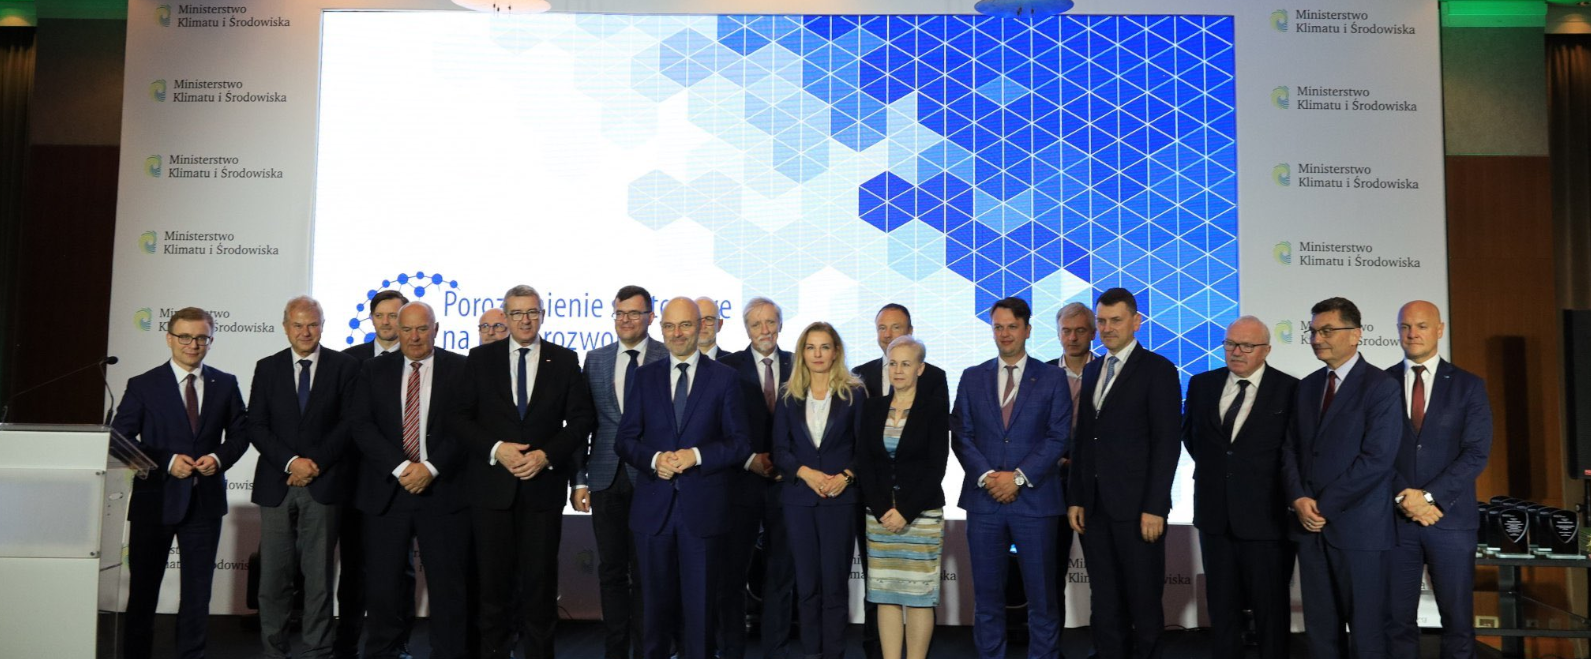 Grupa Azoty signs sectoral agreement to build hydrogen economy